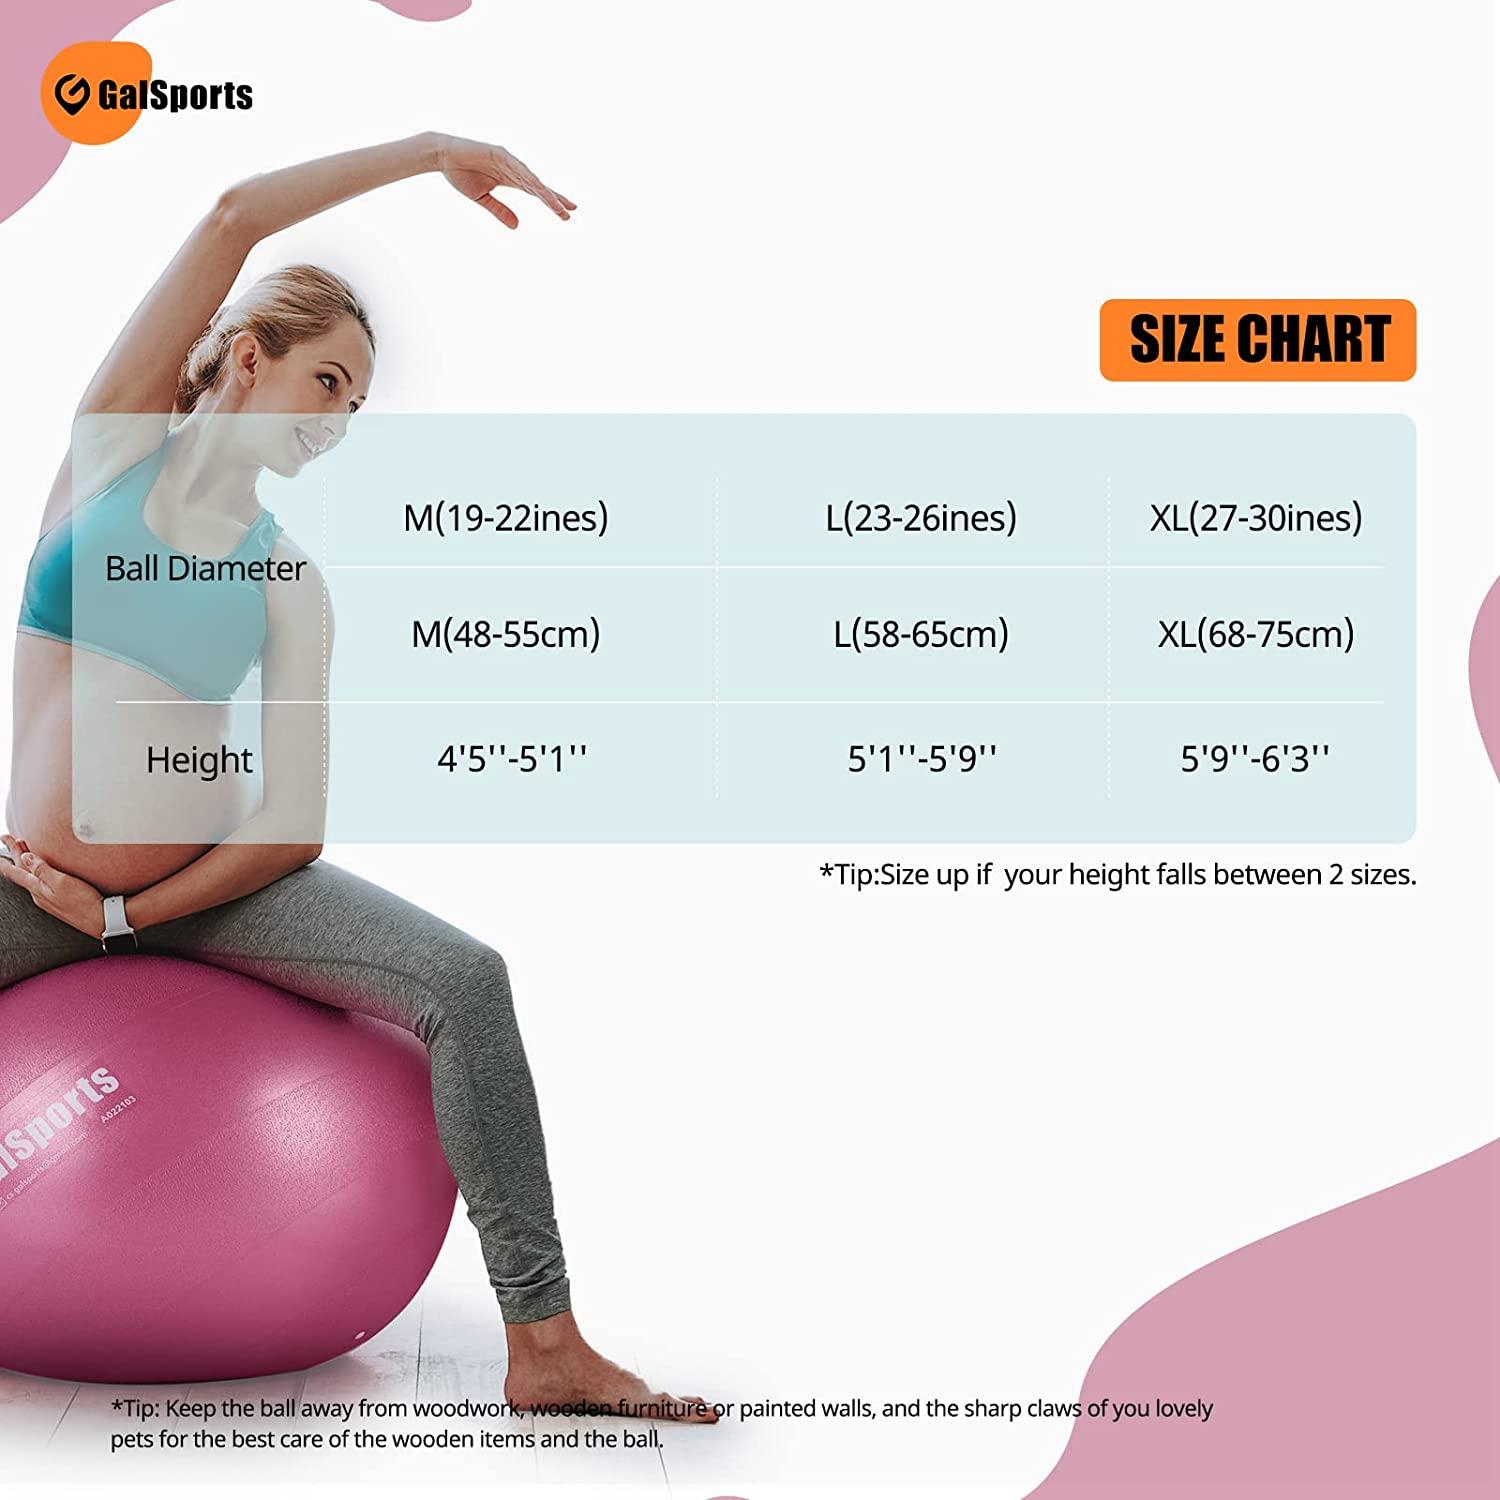 GalSports Pregnancy Ball - Birthing Ball for Workout Yoga